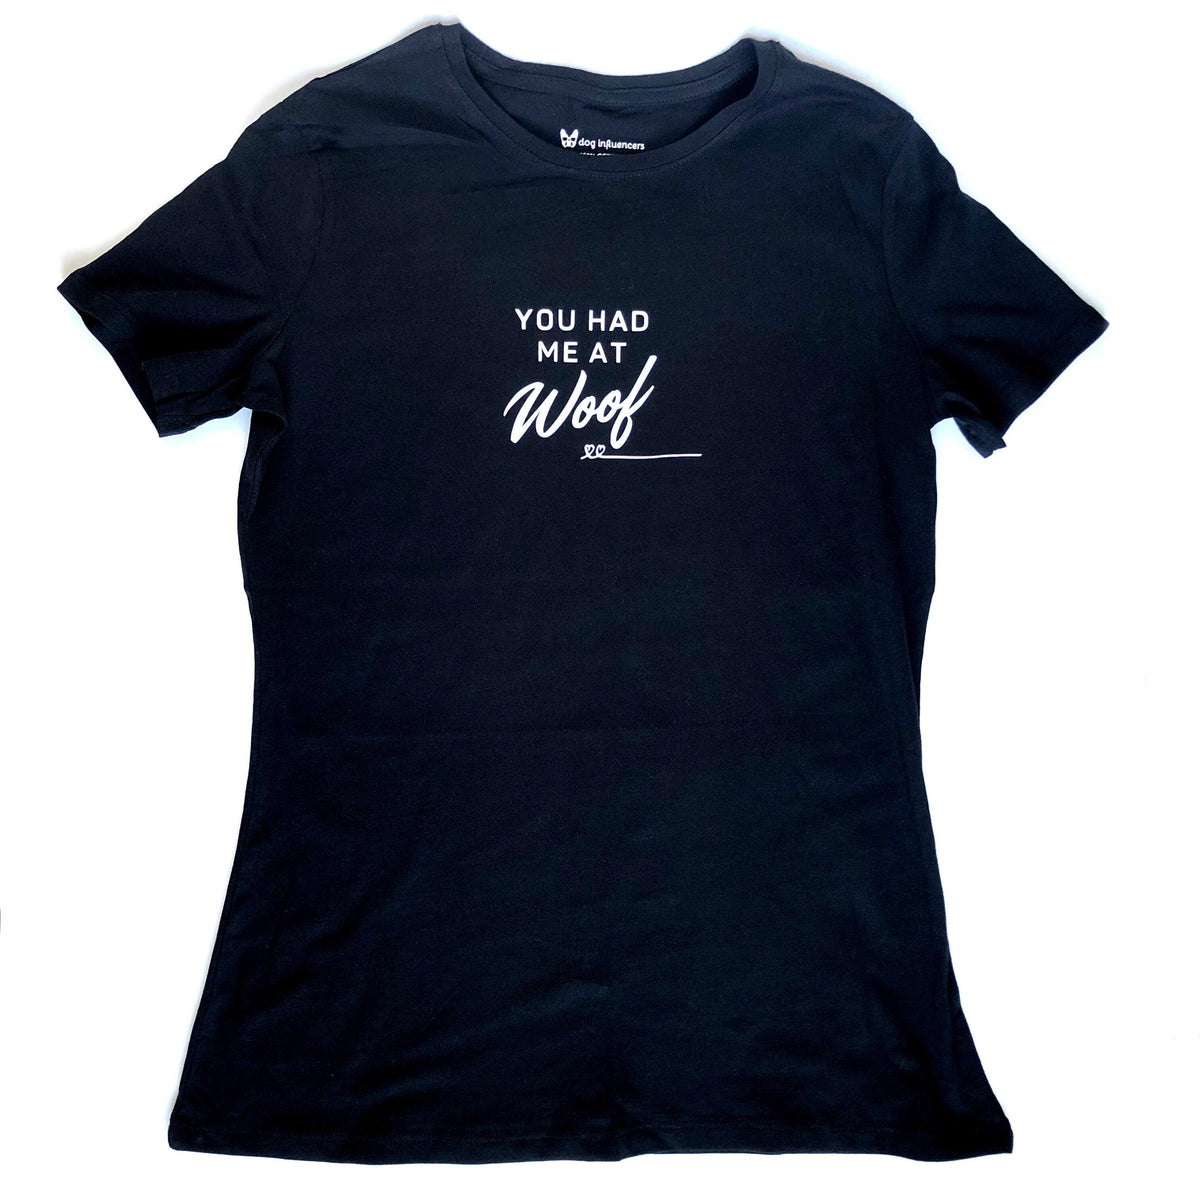 "You had me at Woof" Black T-Shirt - Dog Influencers